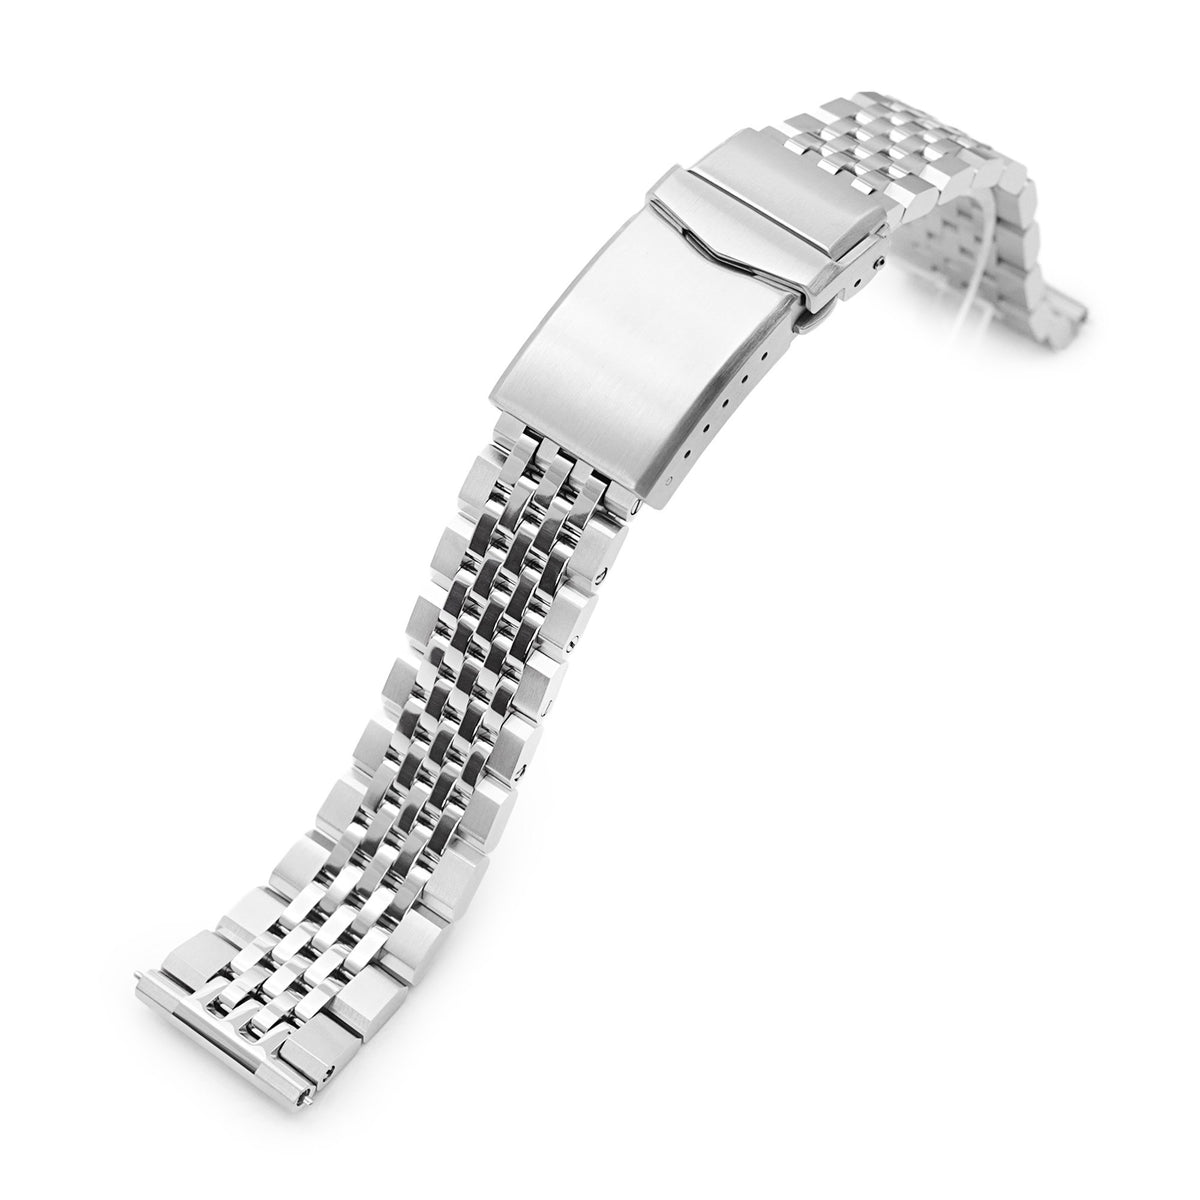 20mm Asteroid QR Watch Band Straight End Quick Release, 316L Stainless Steel Brushed and Polished V-Clasp Strapcode Watch Bands